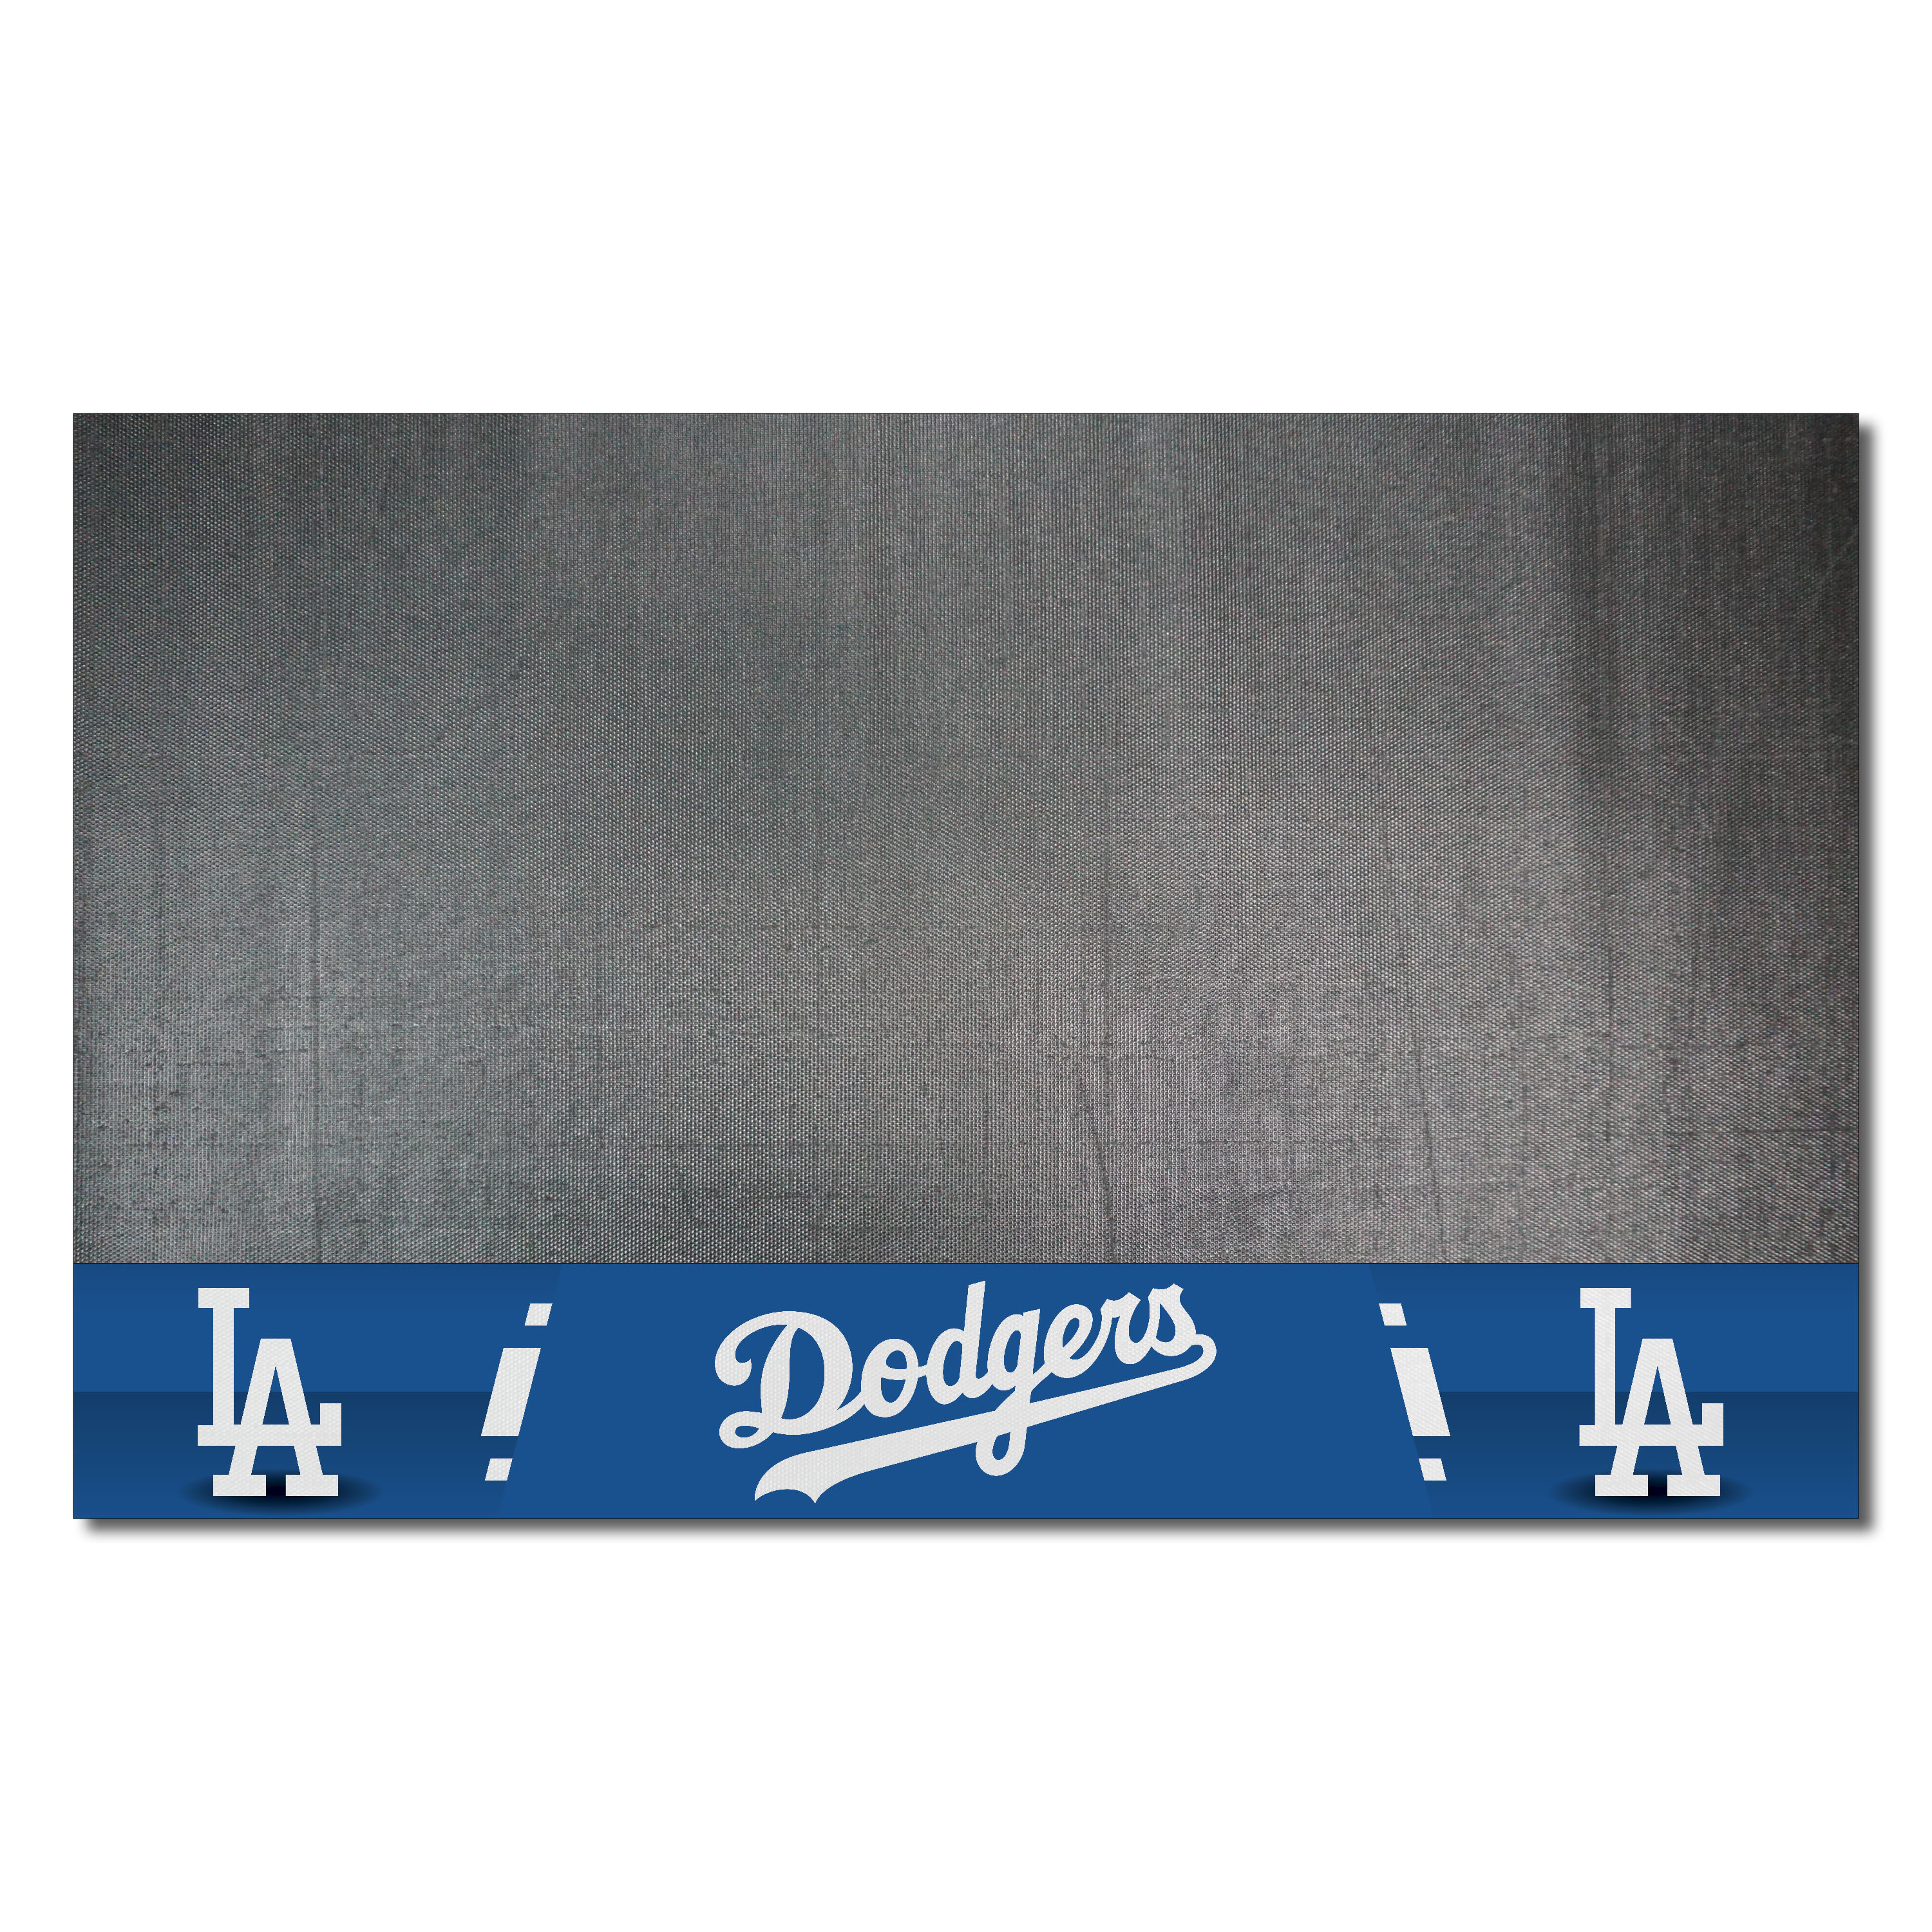 Los Angeles Dodgers Team Jersey Cutting Board